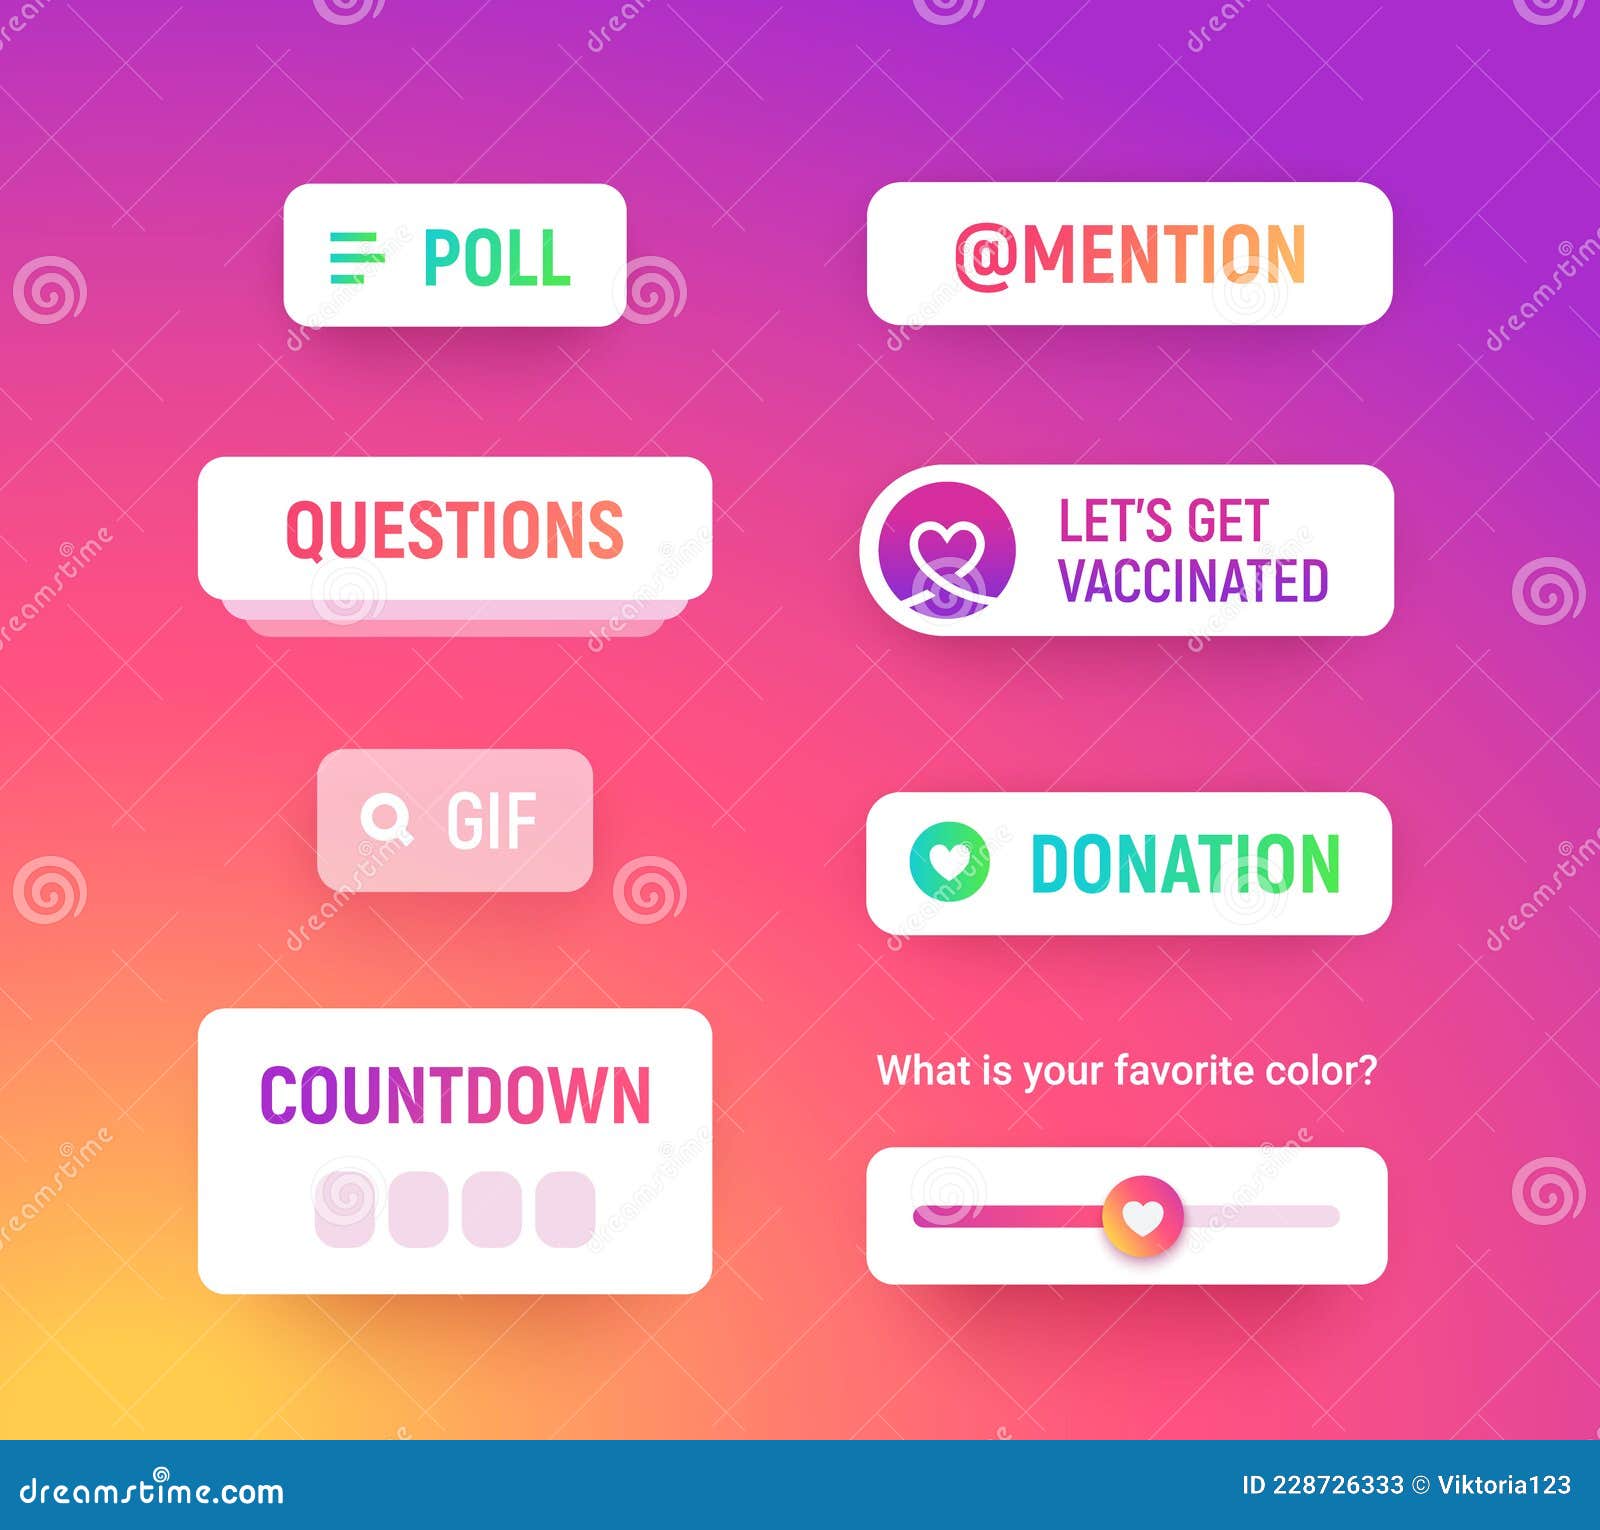 storie social media sticker, different insta labels on white box vaccinate, poll, countdown, mention icon, donation